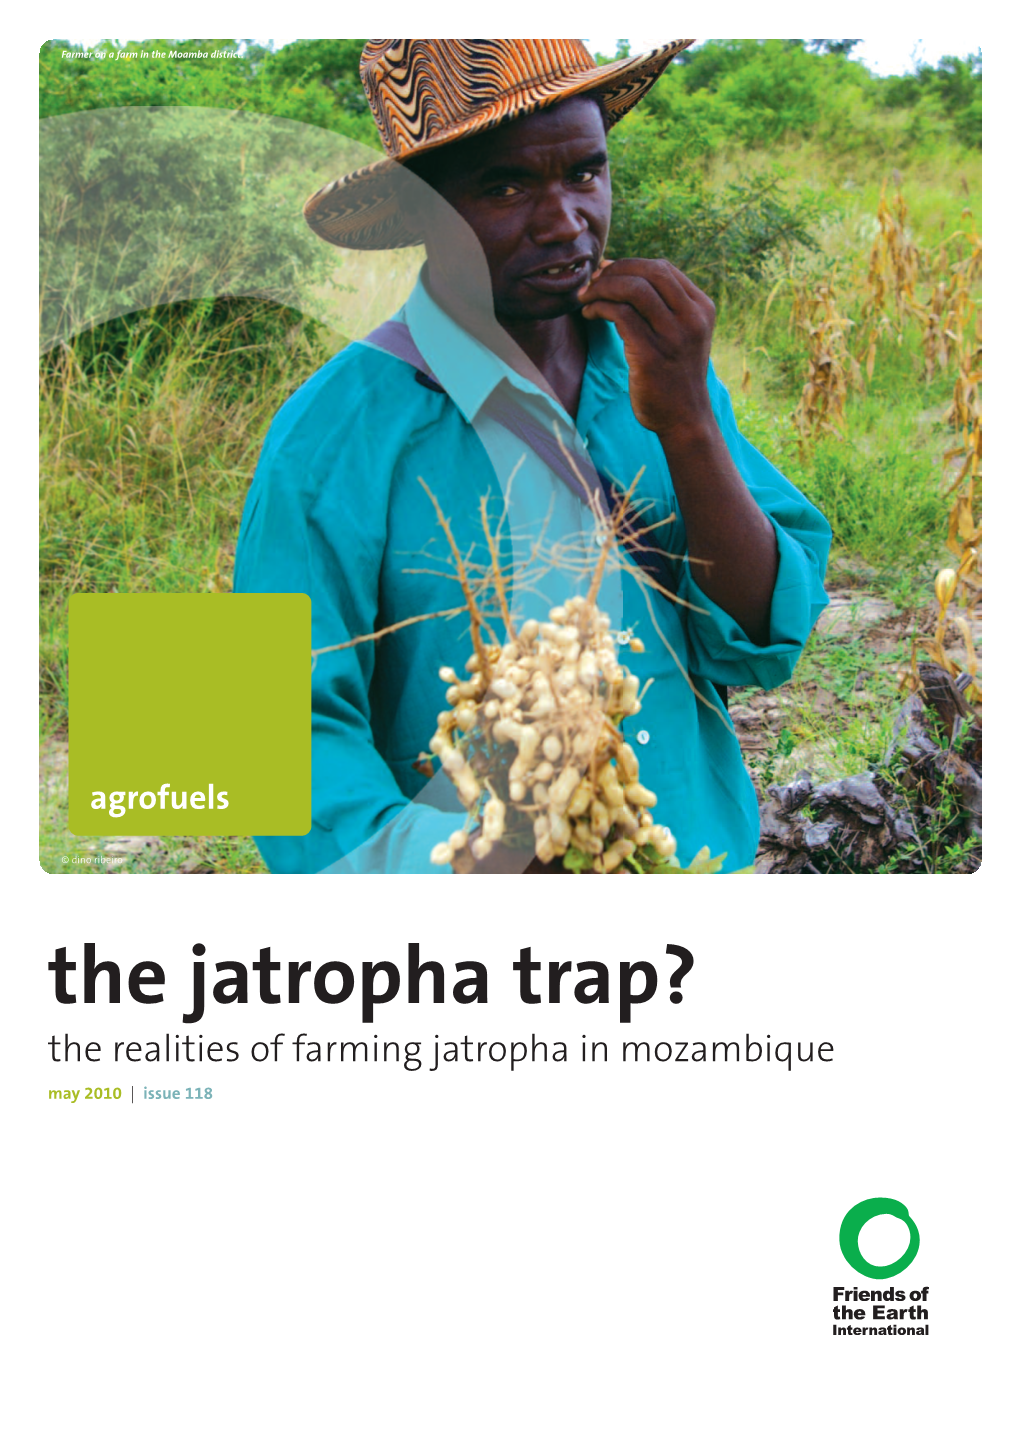 The Realities of Farming Jatropha in Mozambique